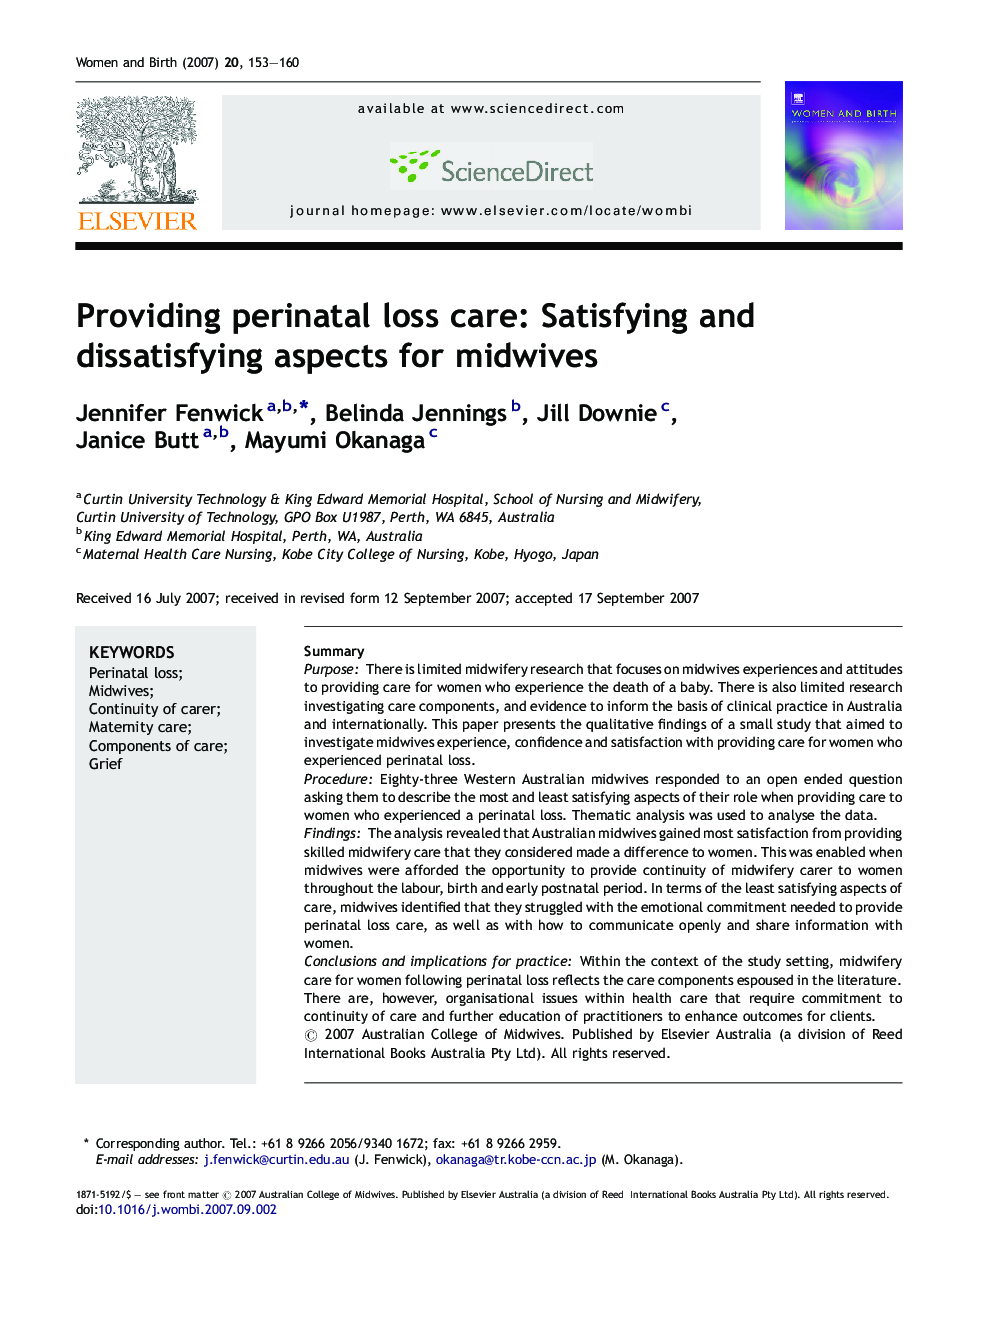 Providing perinatal loss care: Satisfying and dissatisfying aspects for midwives